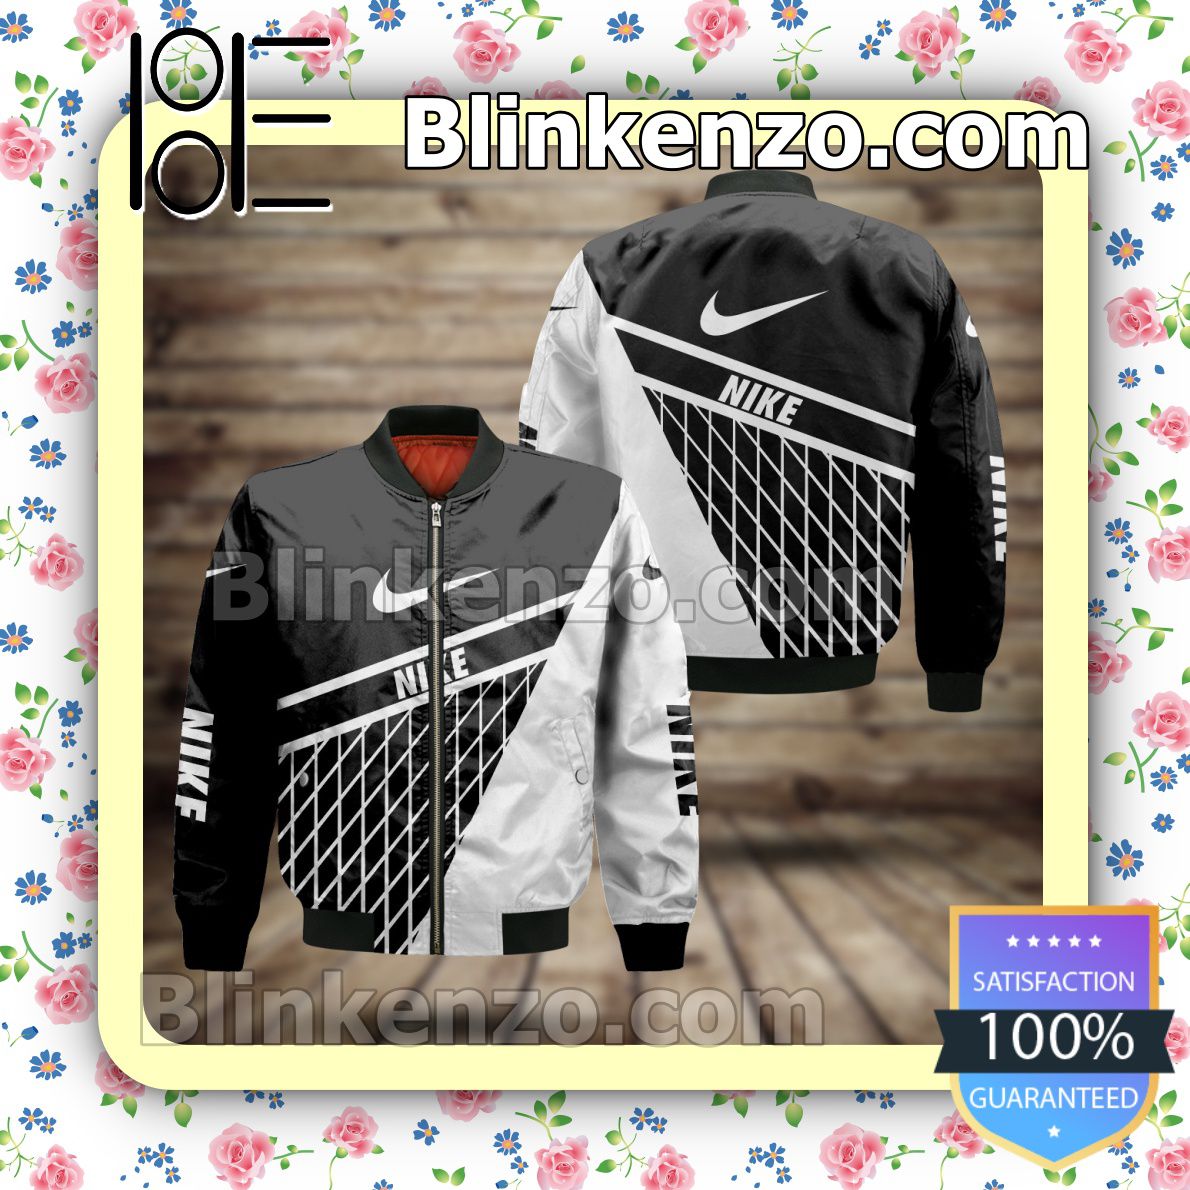 Nike Black And White With Rhombus Check Military Jacket Sportwear